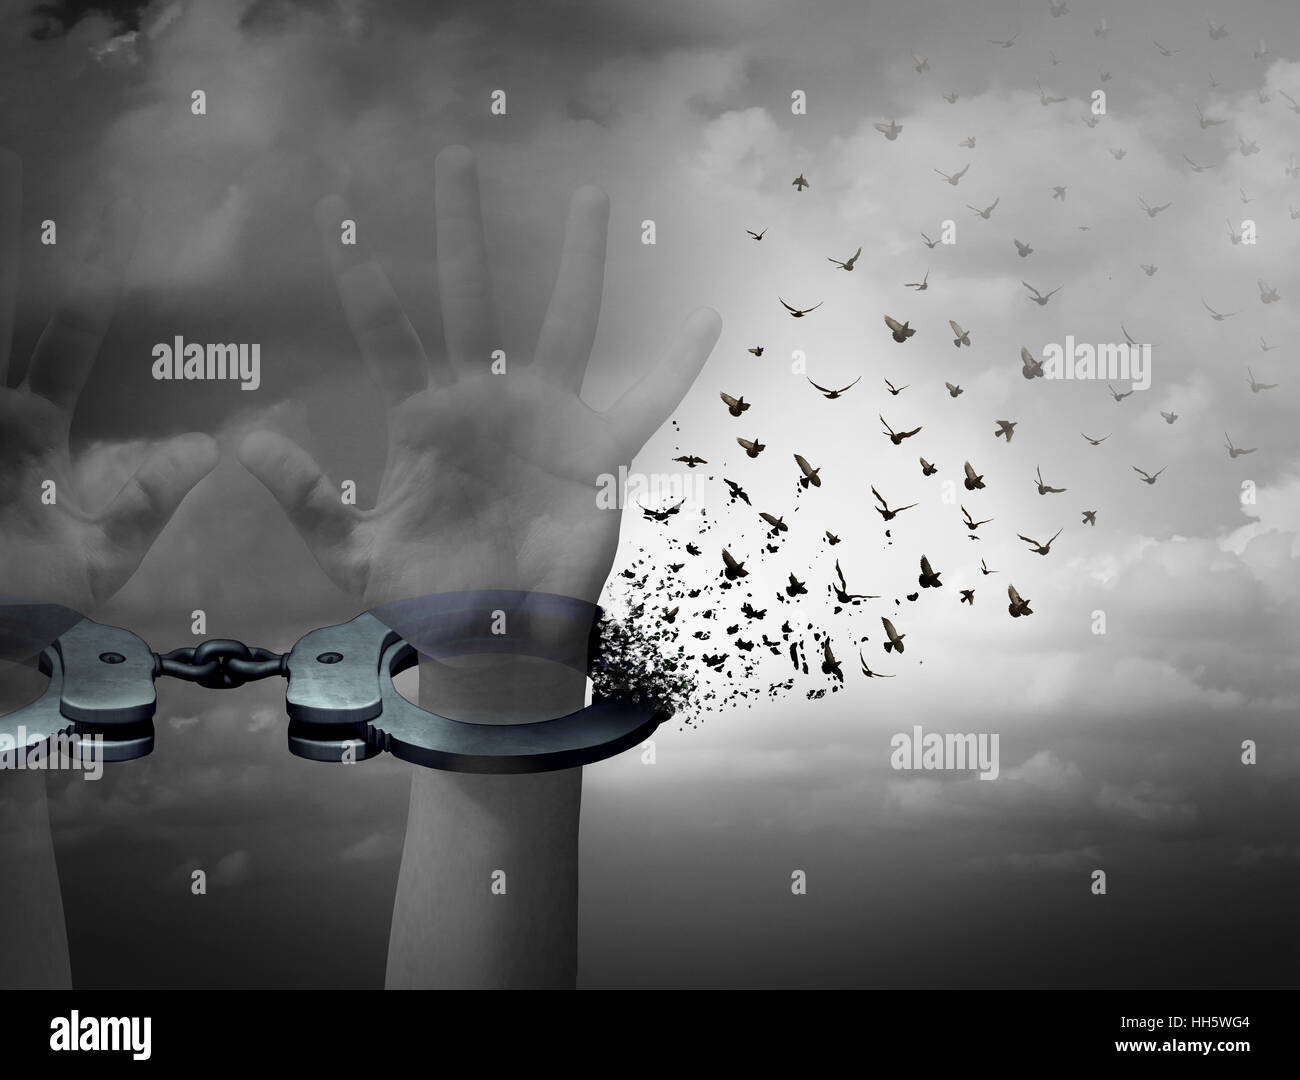 Free from shackles freedom concept and redemption symbol as human hands in opening handcuffs being transformed into flying birds as a deliverance and Stock Photo